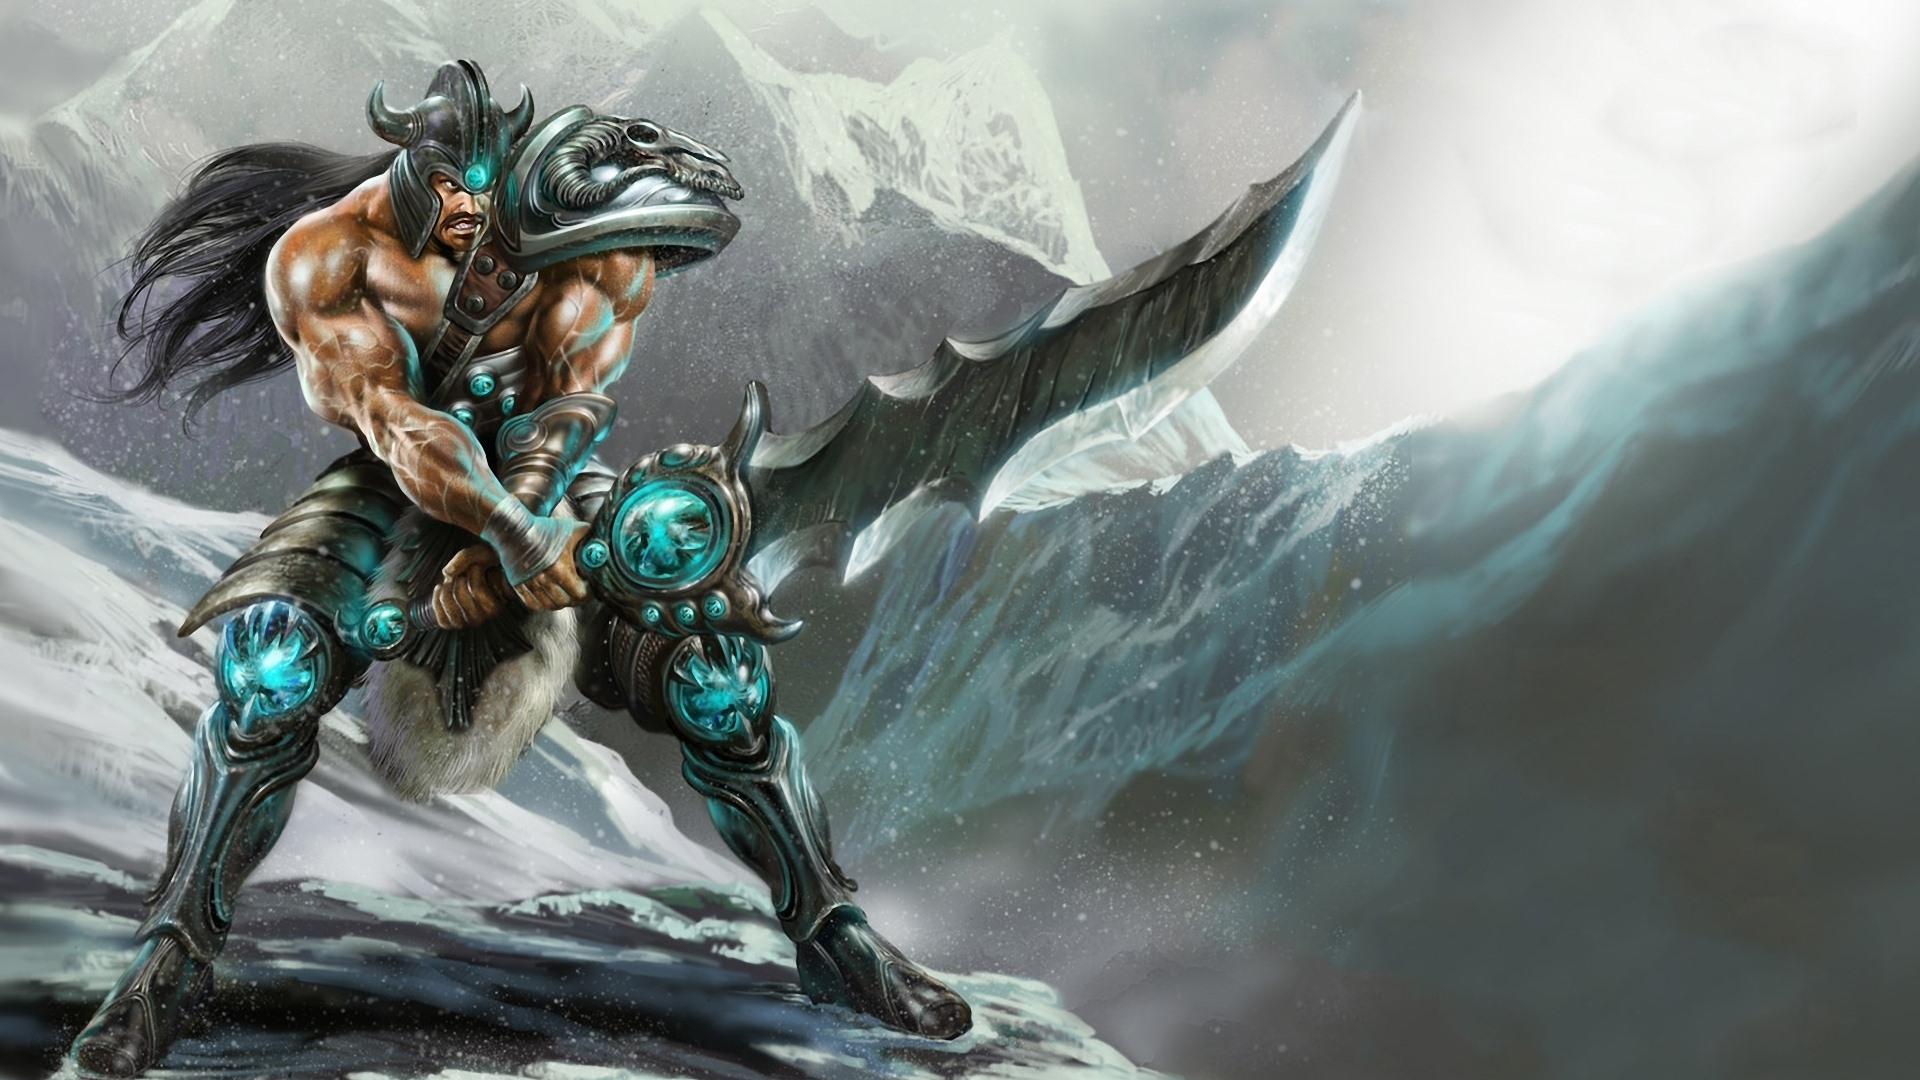 League of Legends game HD wallpapers #11 - 1920x1080